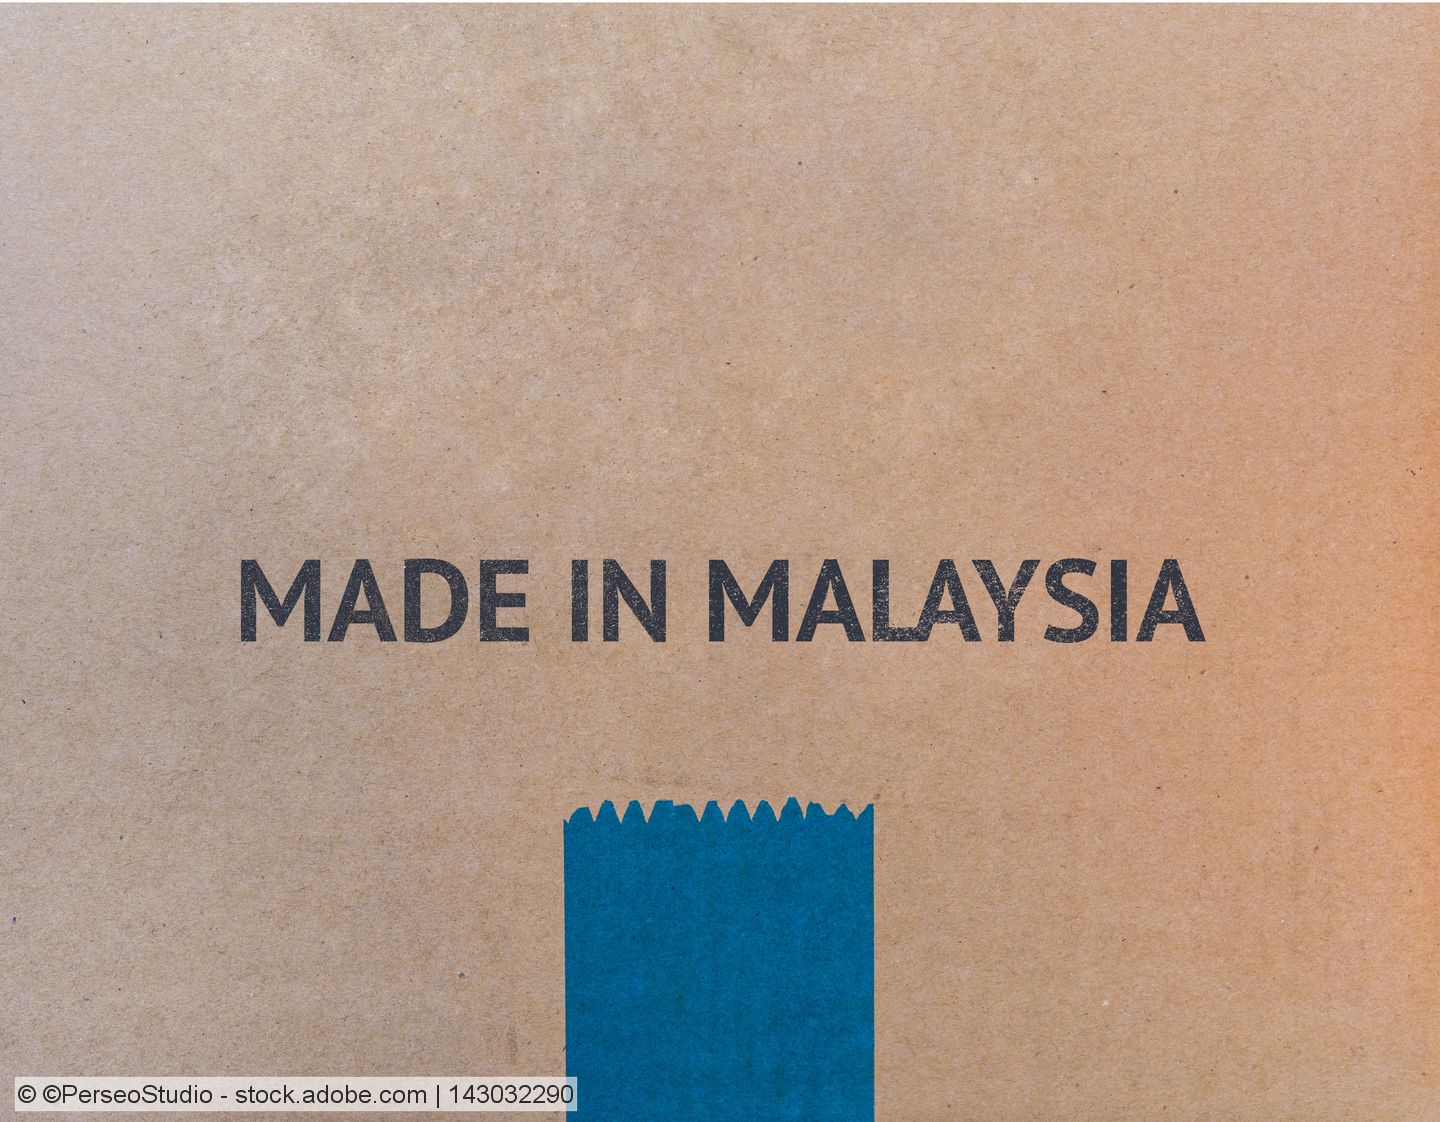 Nine Dragons to grow containerboard business in Malaysia